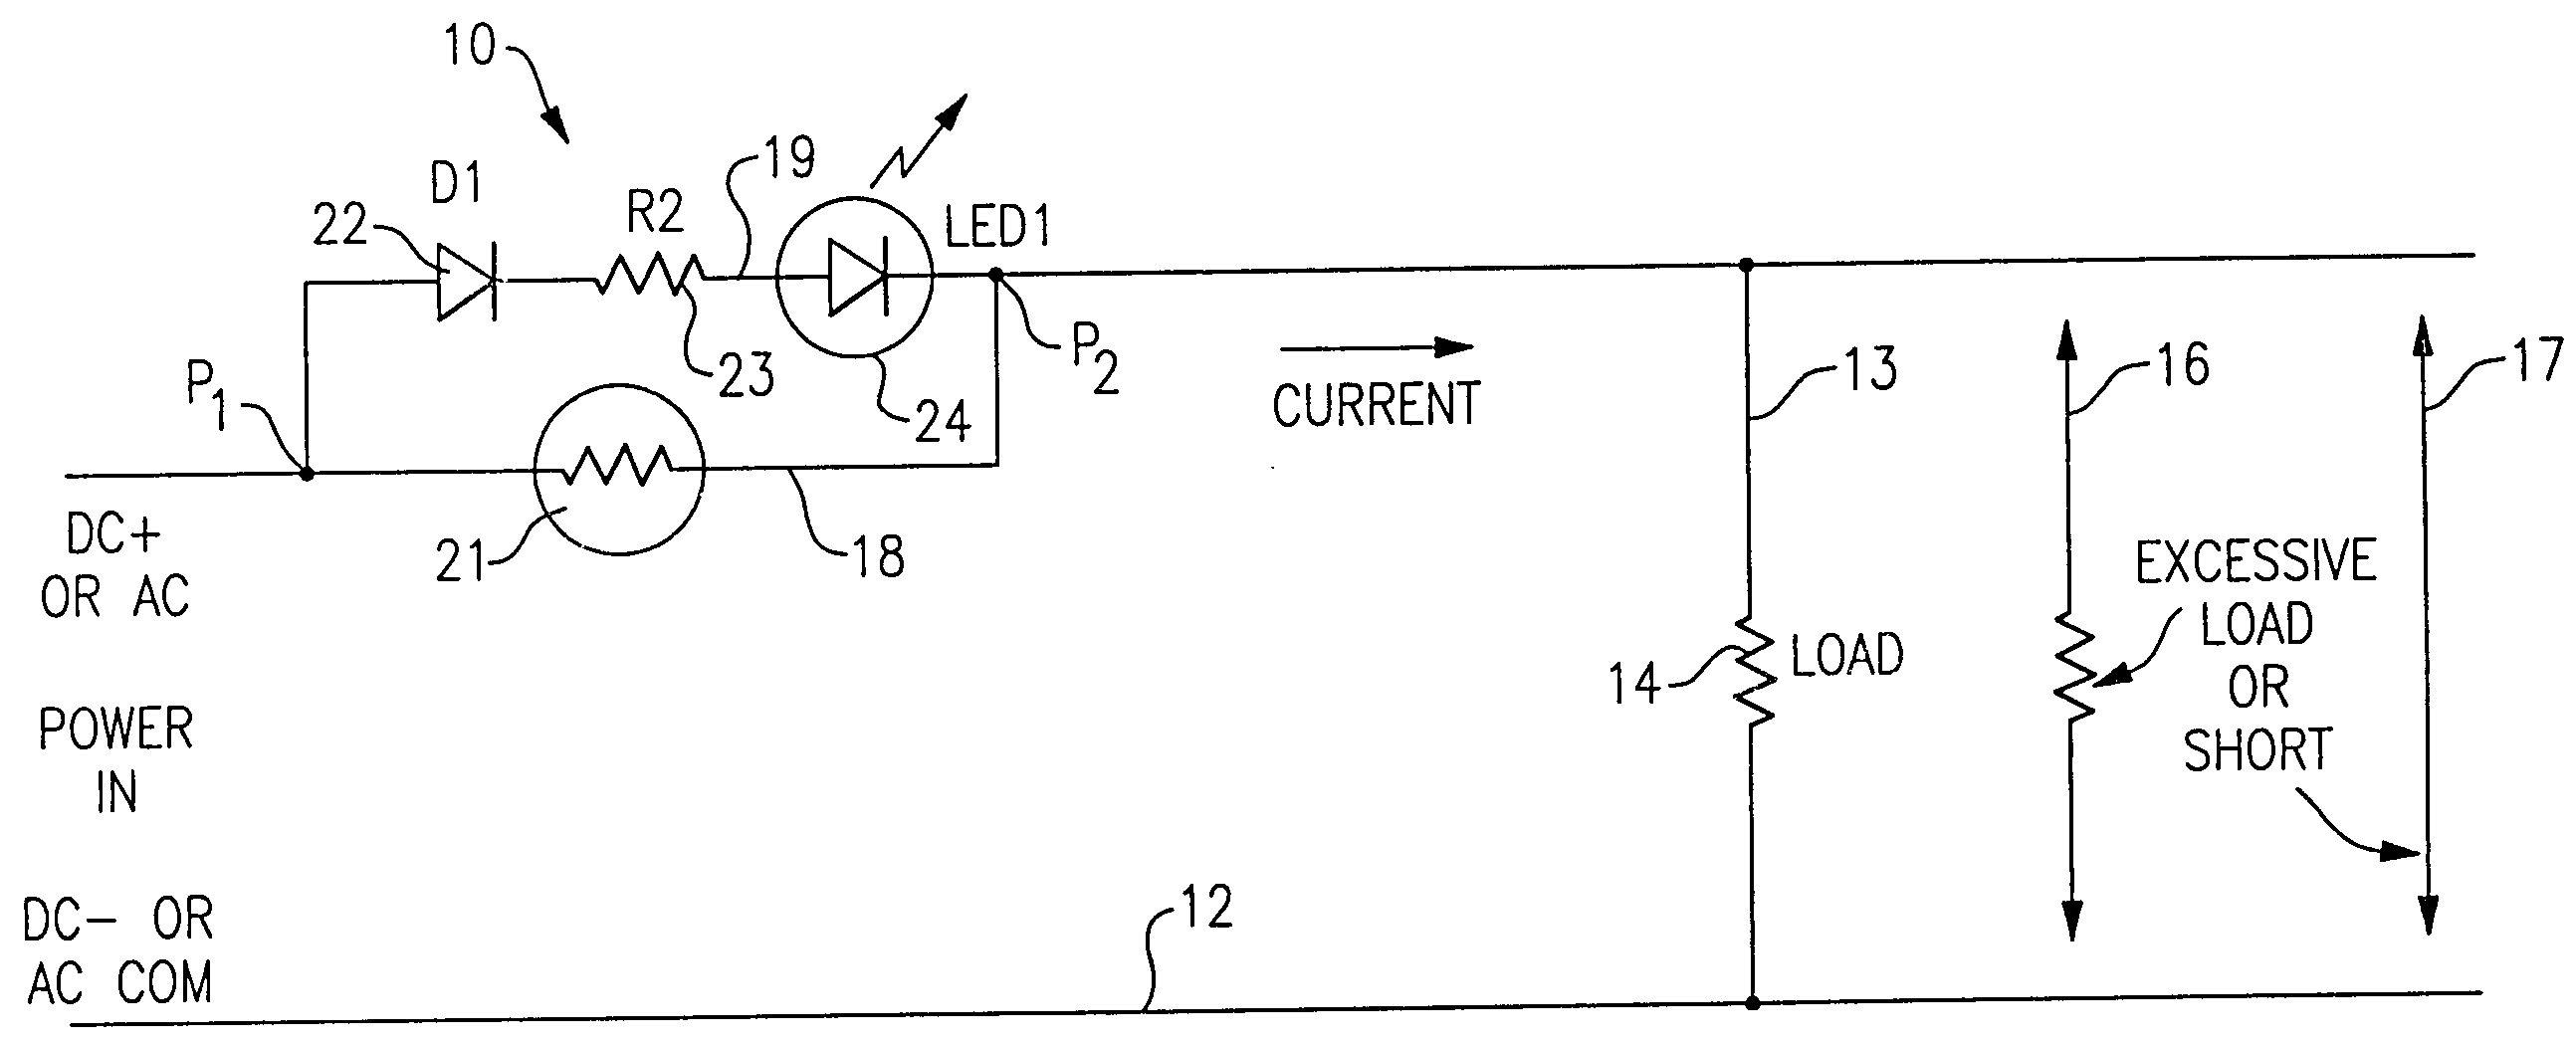 Resettable fuse with visual indicator